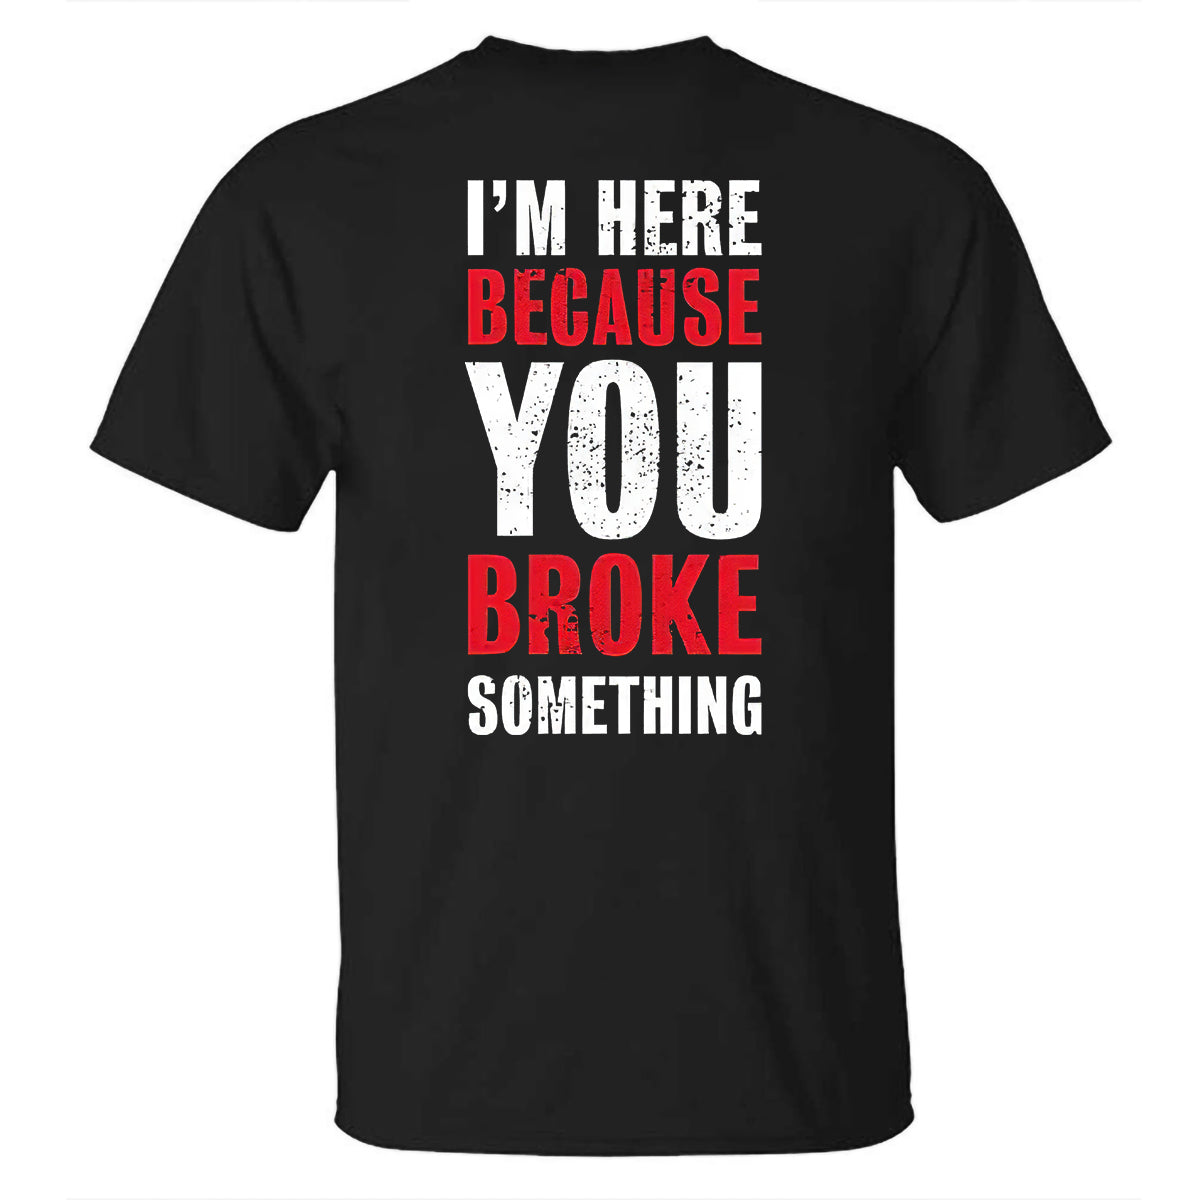 I'm Here Because You Broken Something Printed Men's Casual T-Shirt